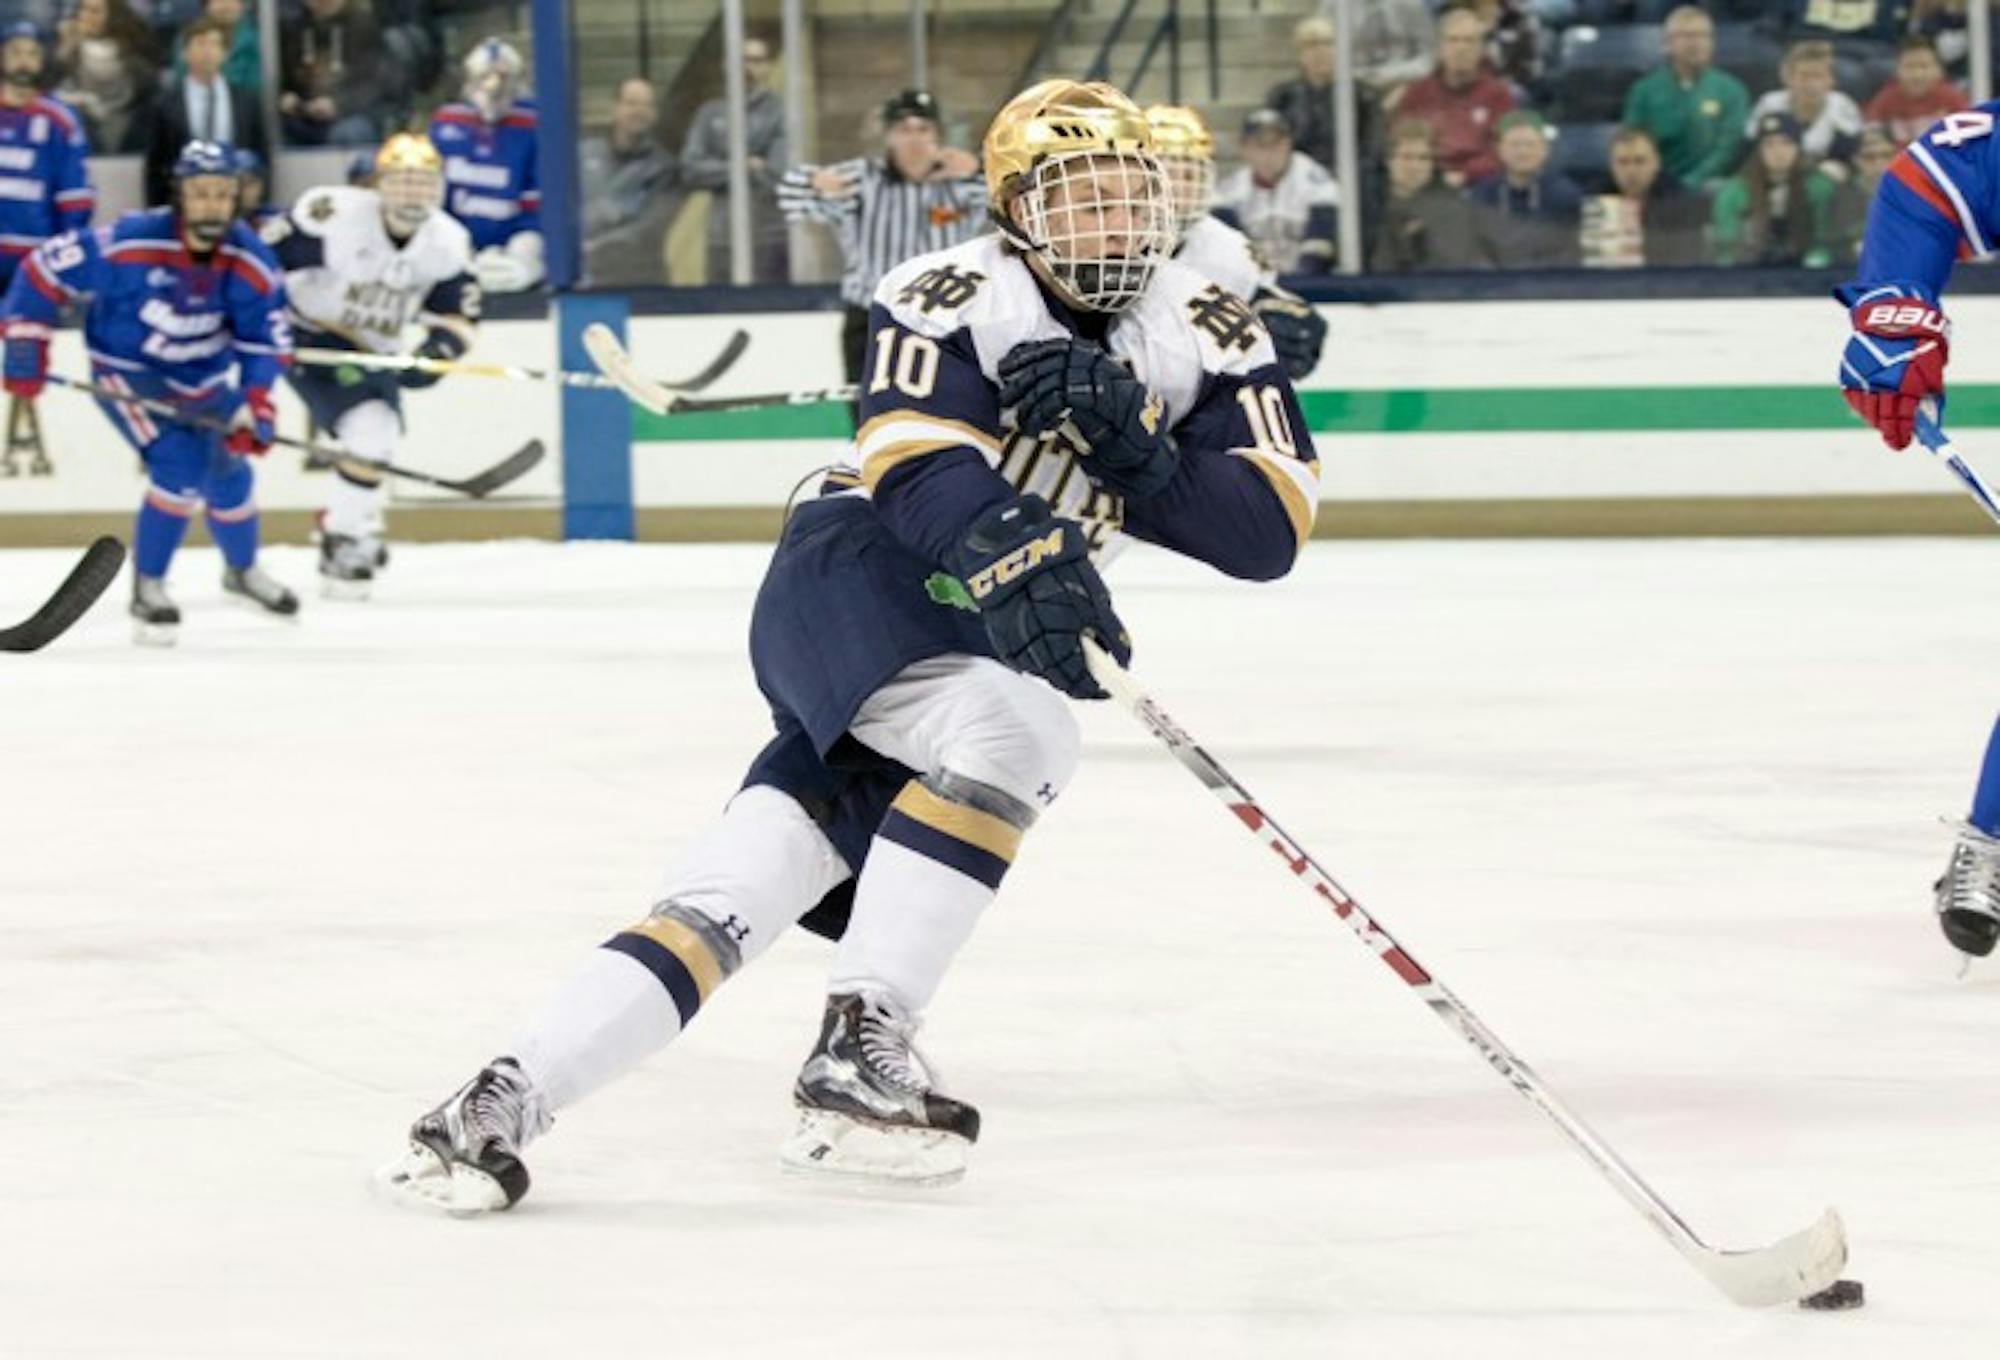 Irish junior forward Anders Bjork skates up the ice with the puck during Notre Dame’s 4-1 loss to UMass Lowell on Nov. 17 at Compton Family Ice Arena.